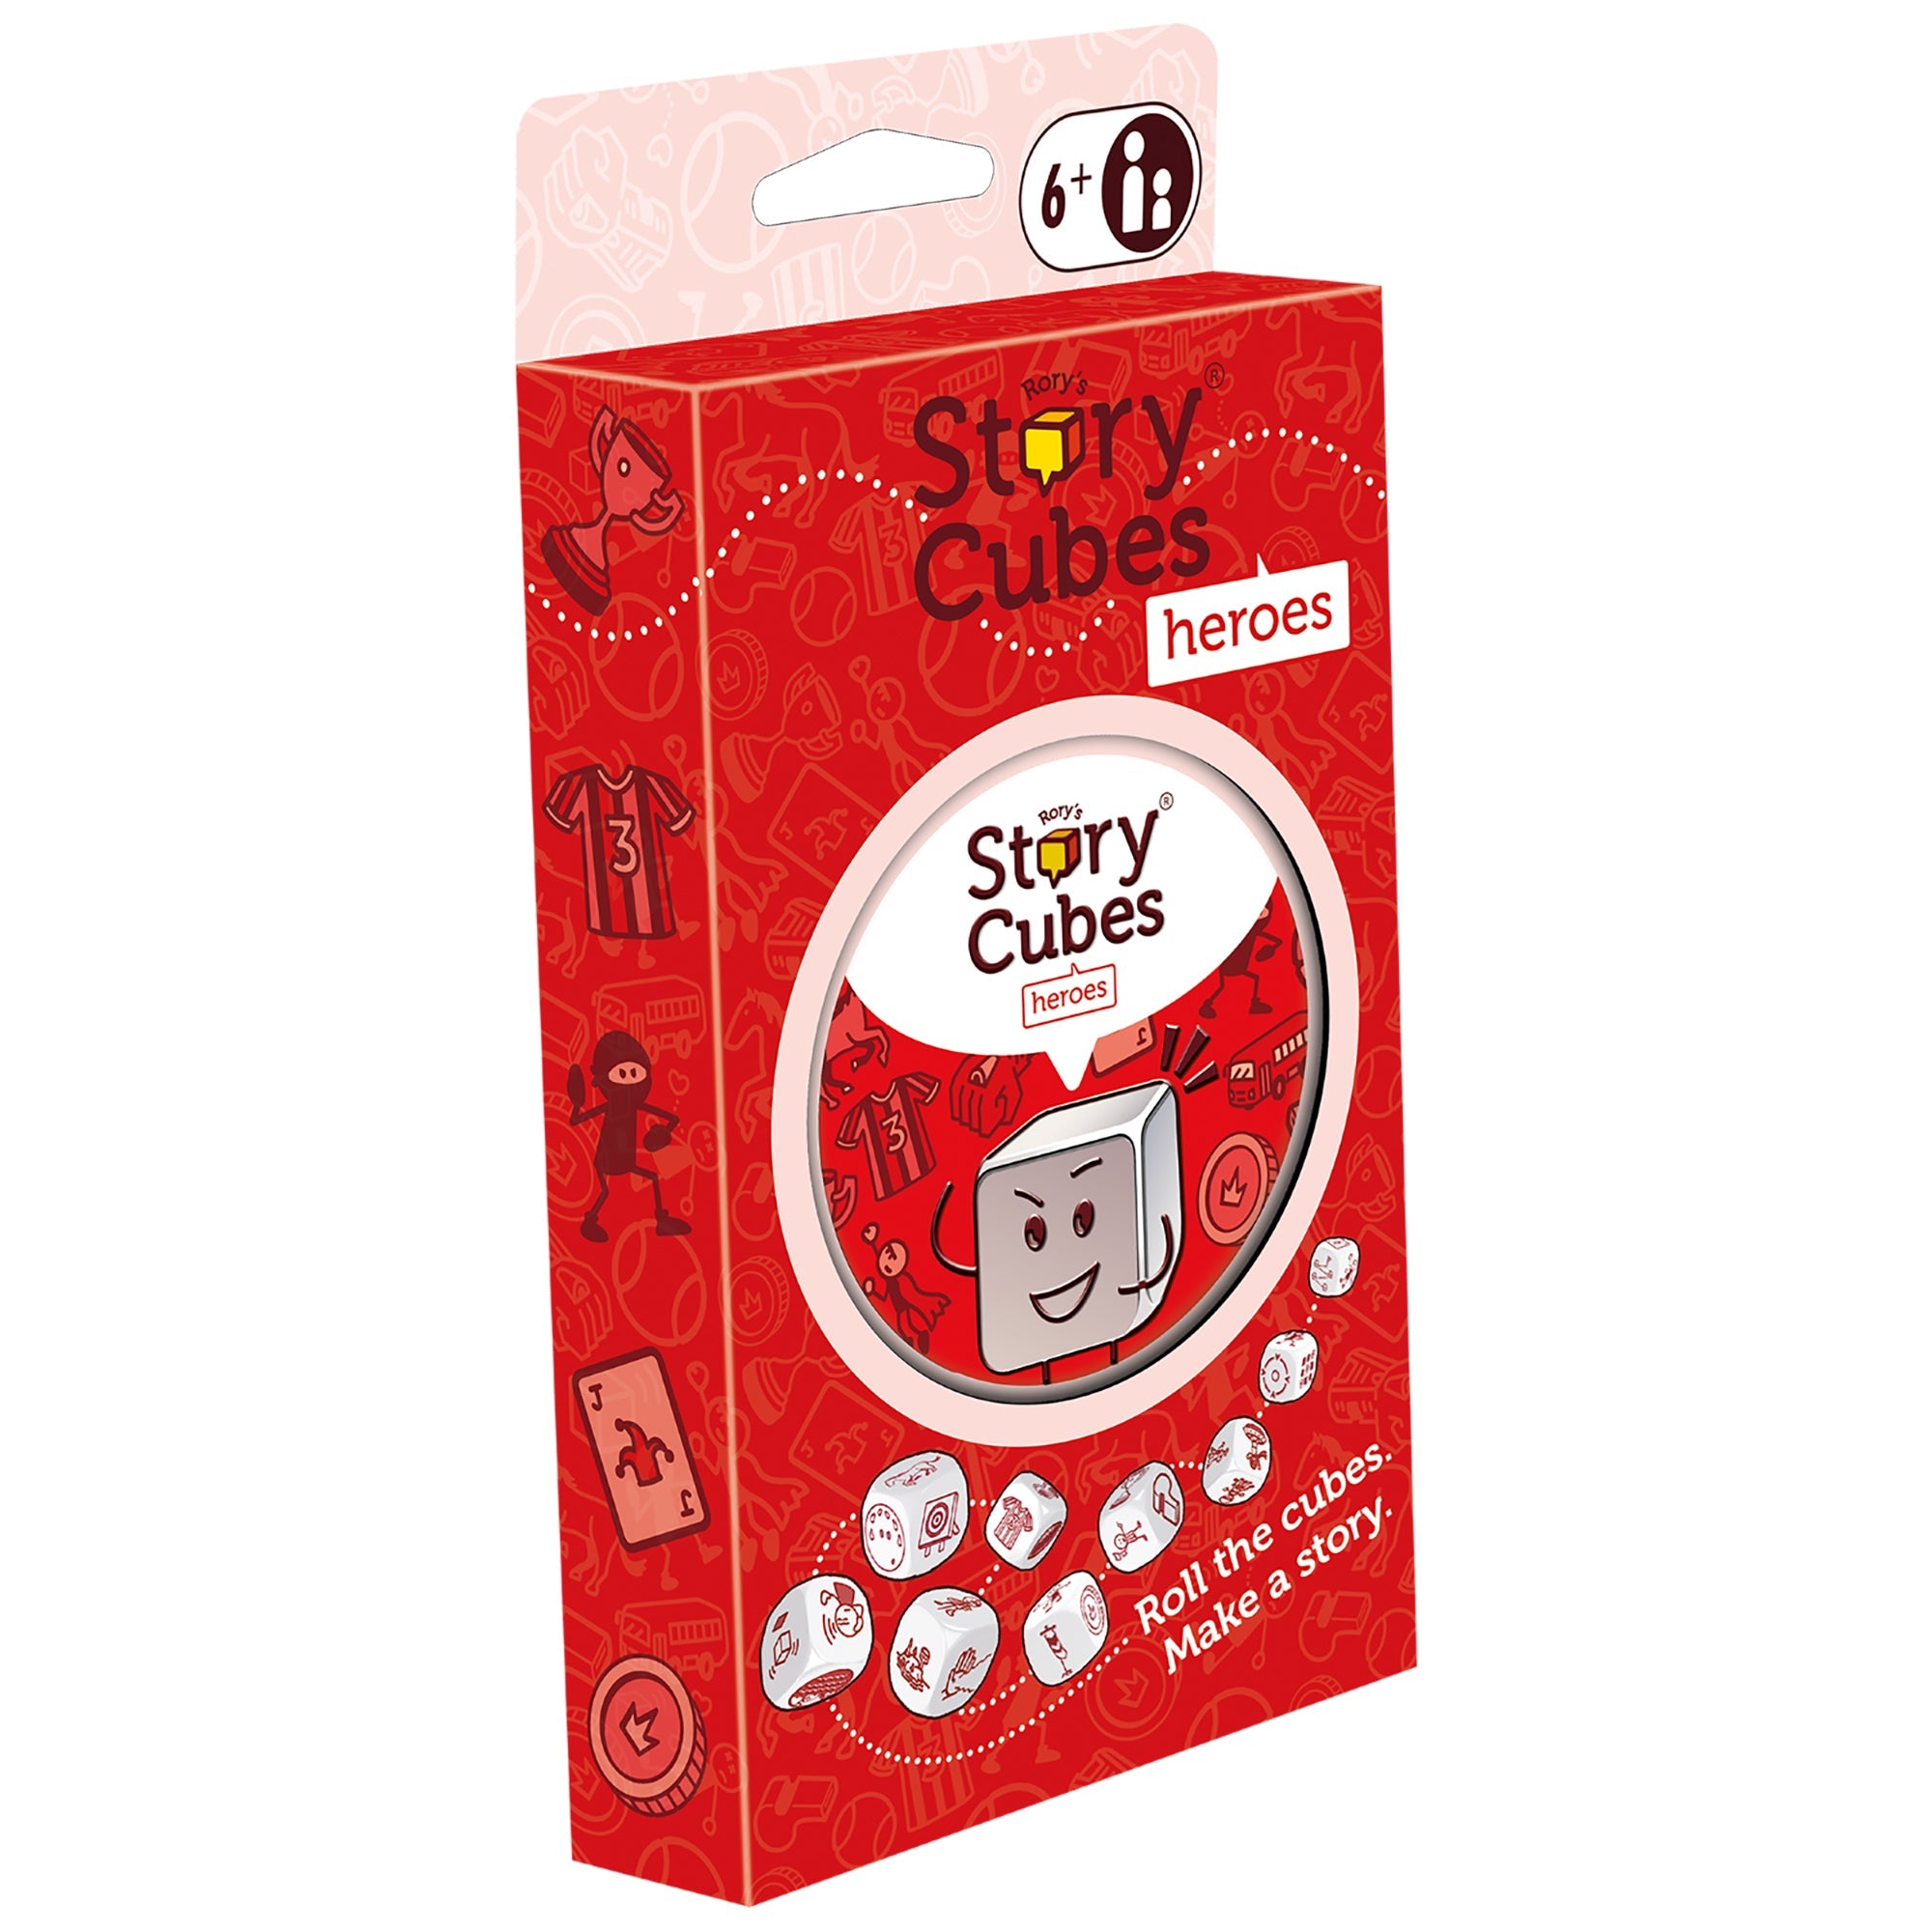 Rory Story Cubes Heroes - Multilingual 6+